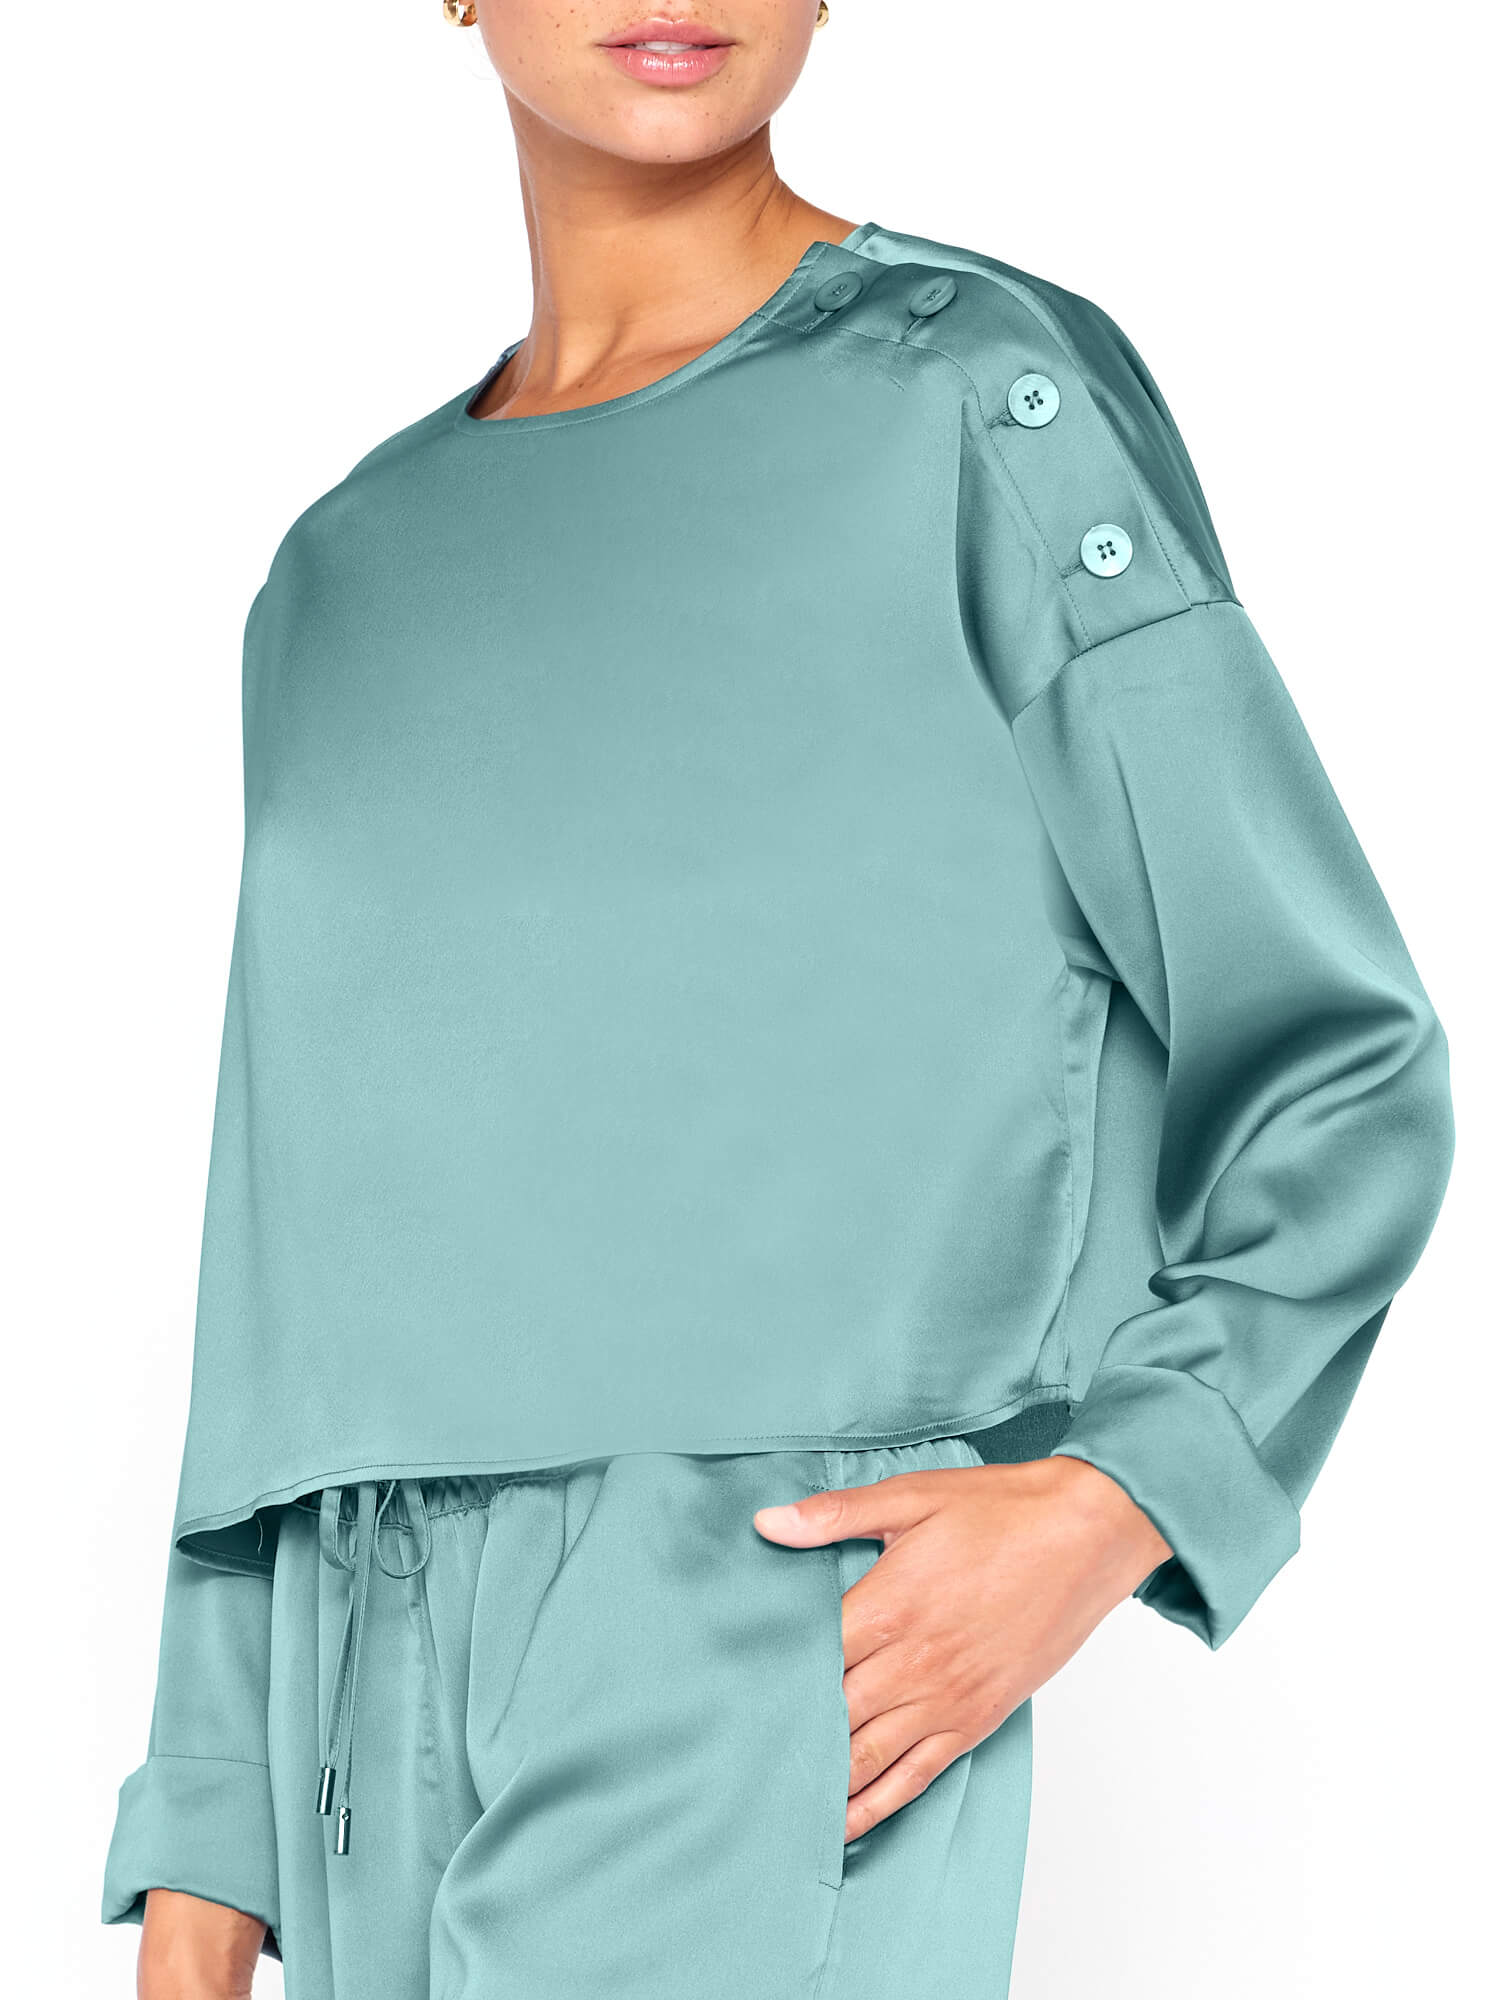 Dallas satin teal blue blouse side view